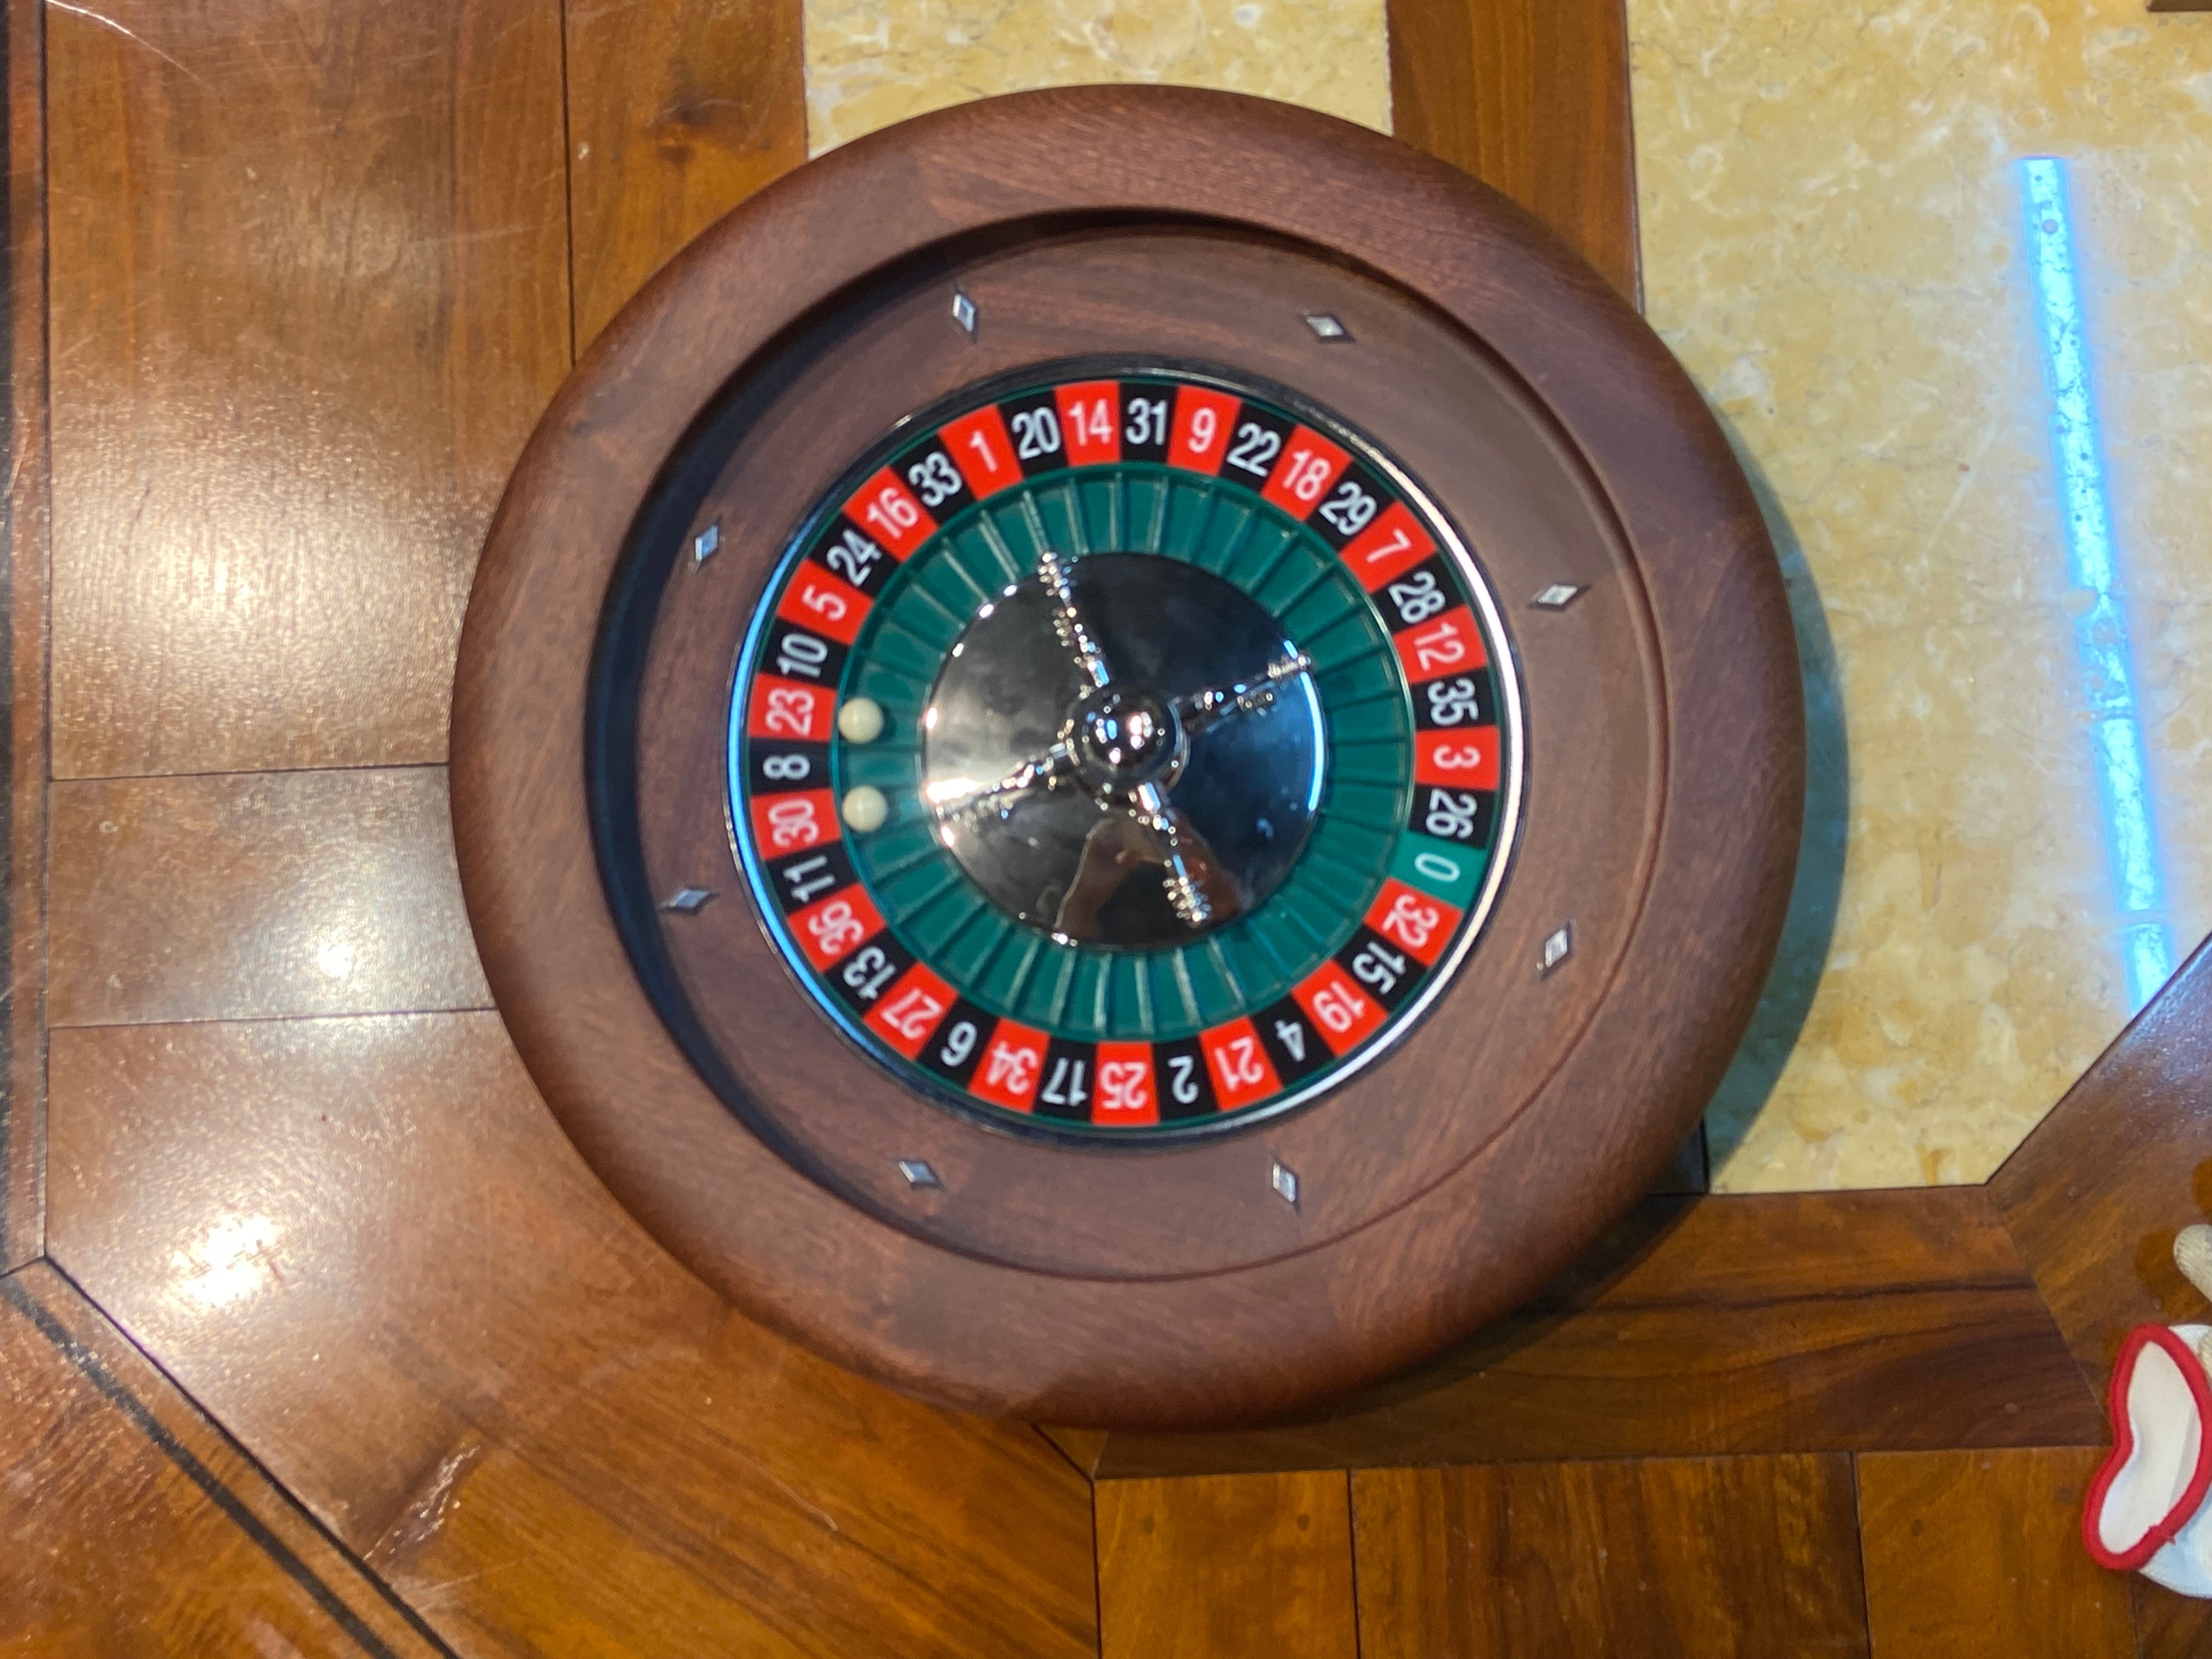 Here we present you a high quality roulette wheel for the home and clubs and events. It is made from solid Sapelli Mahogany - a gorgeous piece of work
Wheel is mounted on 2 rings of ball bearings for perfectly smooth running
Round sided roulette